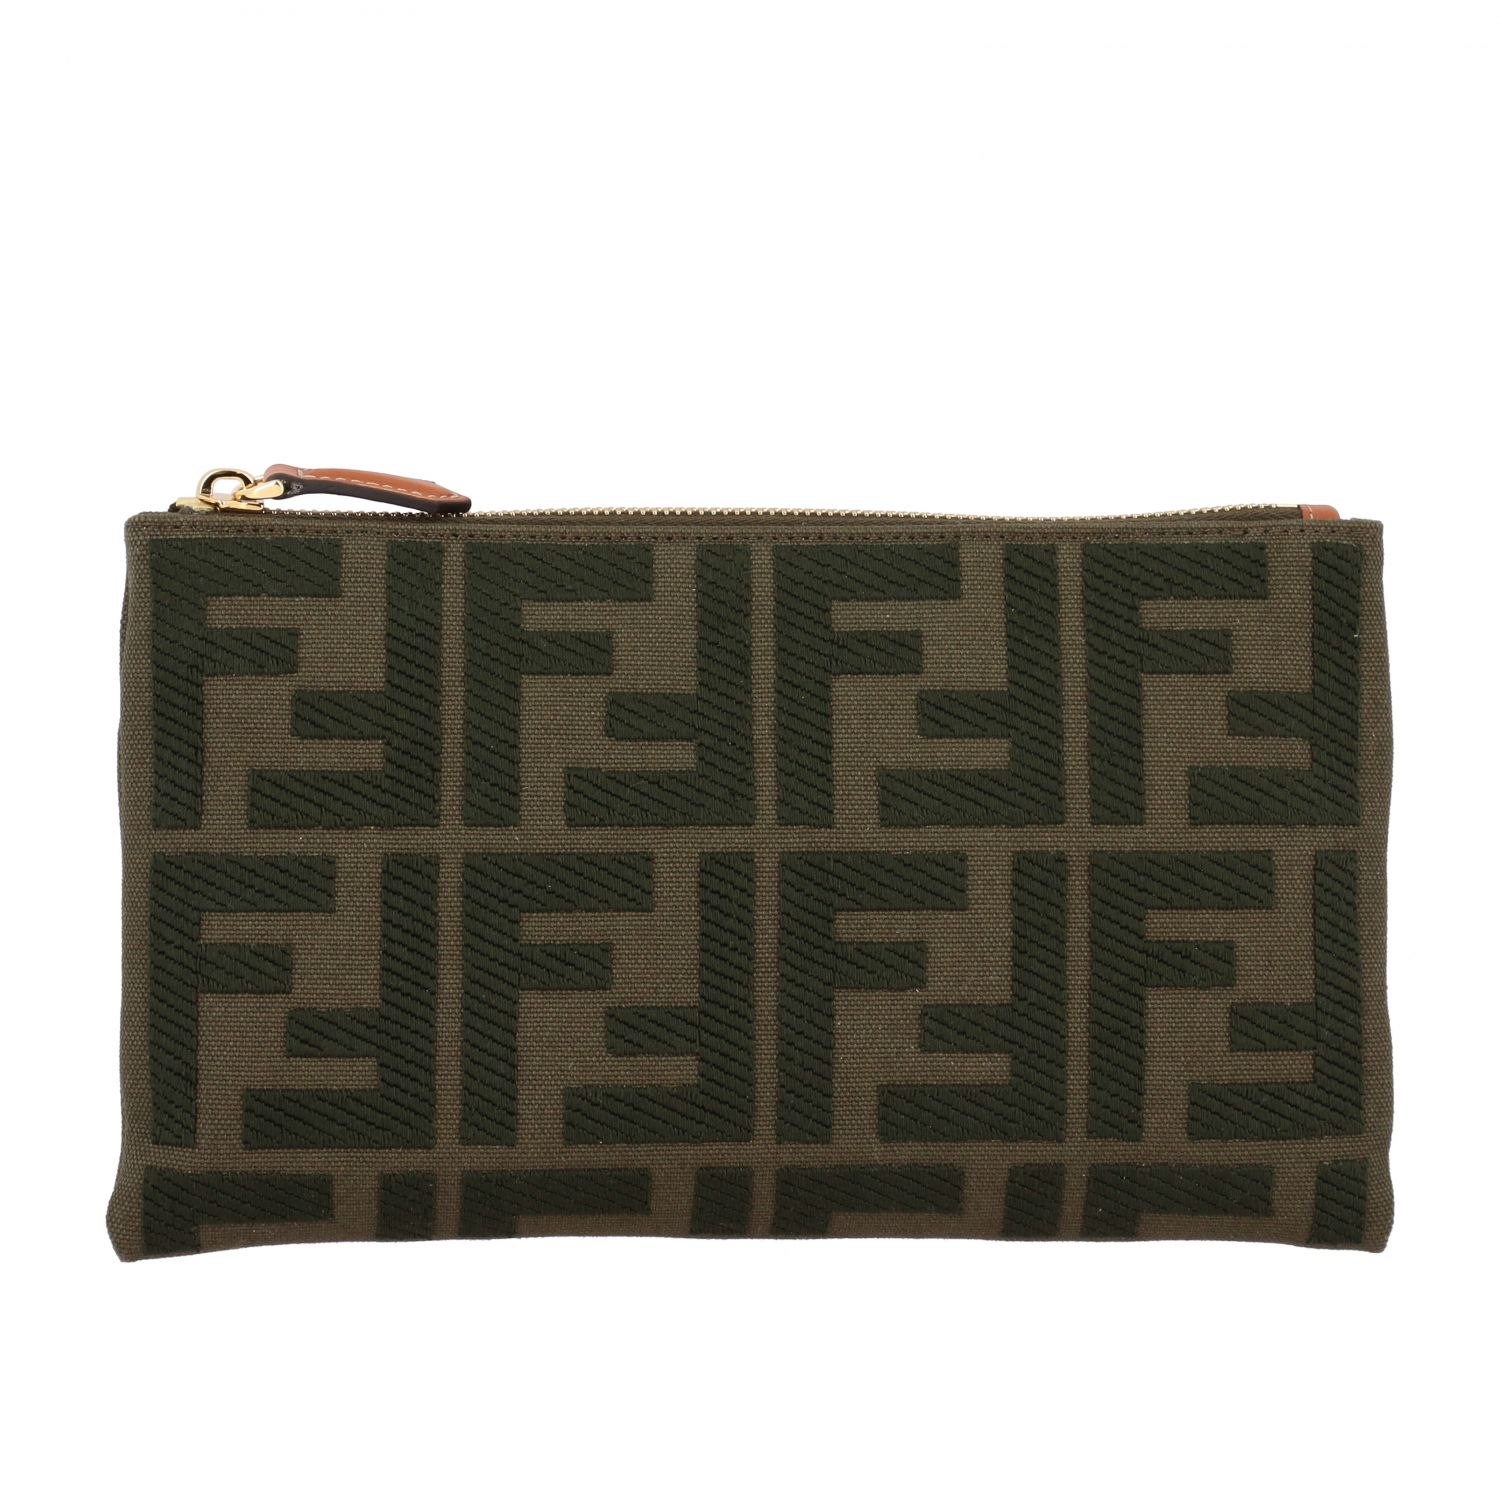 FENDI: small clutch bag in canvas with all over FF monogram | Clutch ...